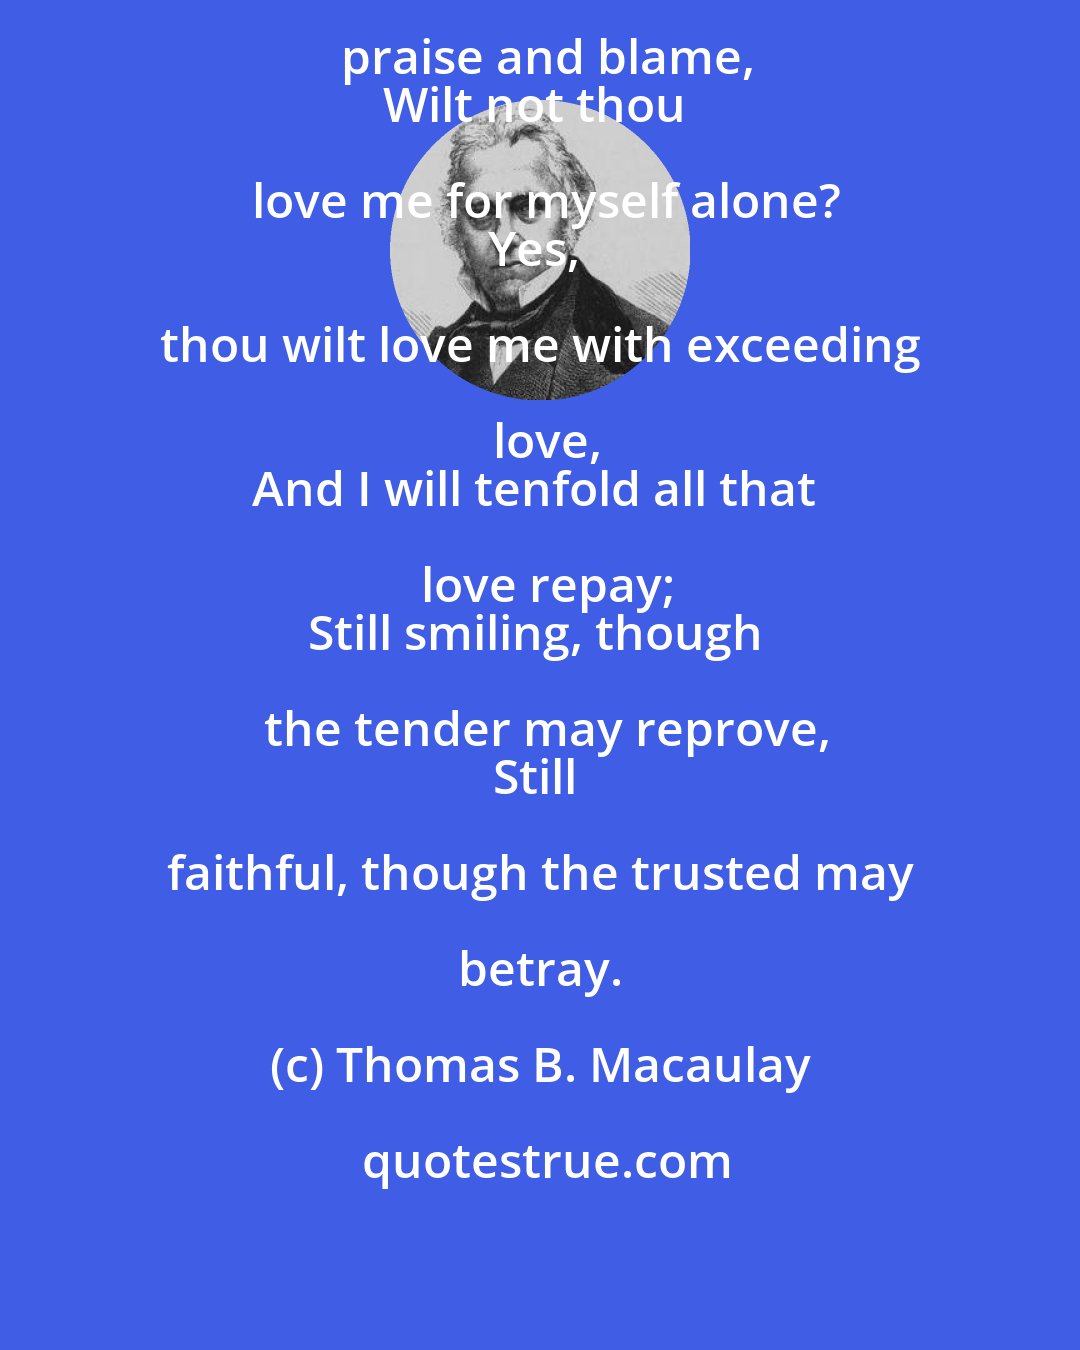 Thomas B. Macaulay: But thou, through good and evil, praise and blame,
Wilt not thou love me for myself alone?
Yes, thou wilt love me with exceeding love,
And I will tenfold all that love repay;
Still smiling, though the tender may reprove,
Still faithful, though the trusted may betray.